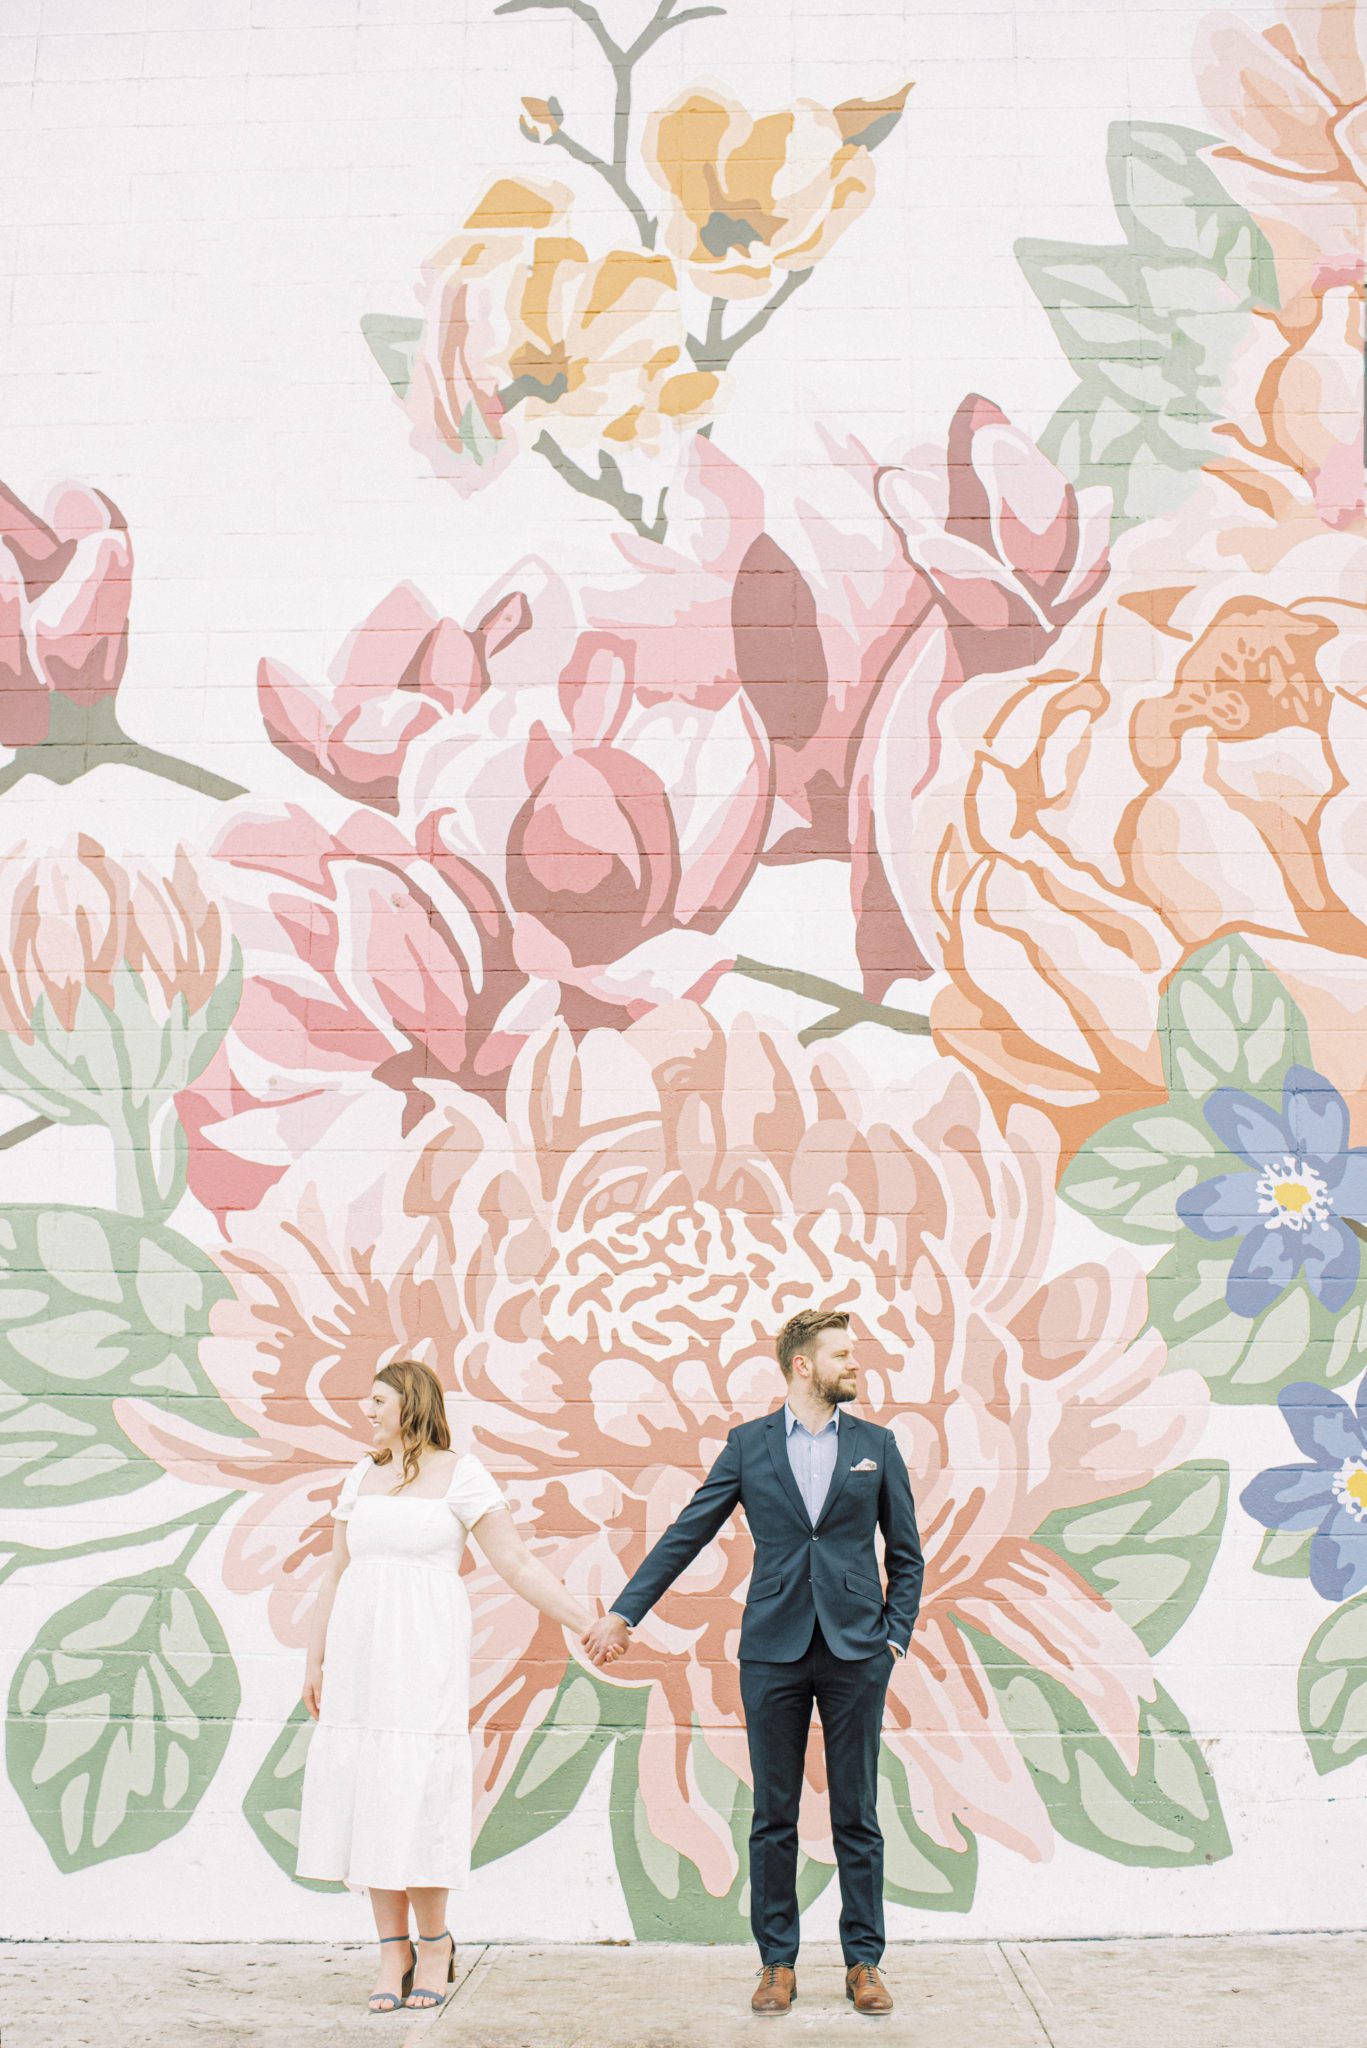 Spring-inspired floral wall mural perfect for romantic and playful engagement photos at Manchester Square in Edmonton Alberta